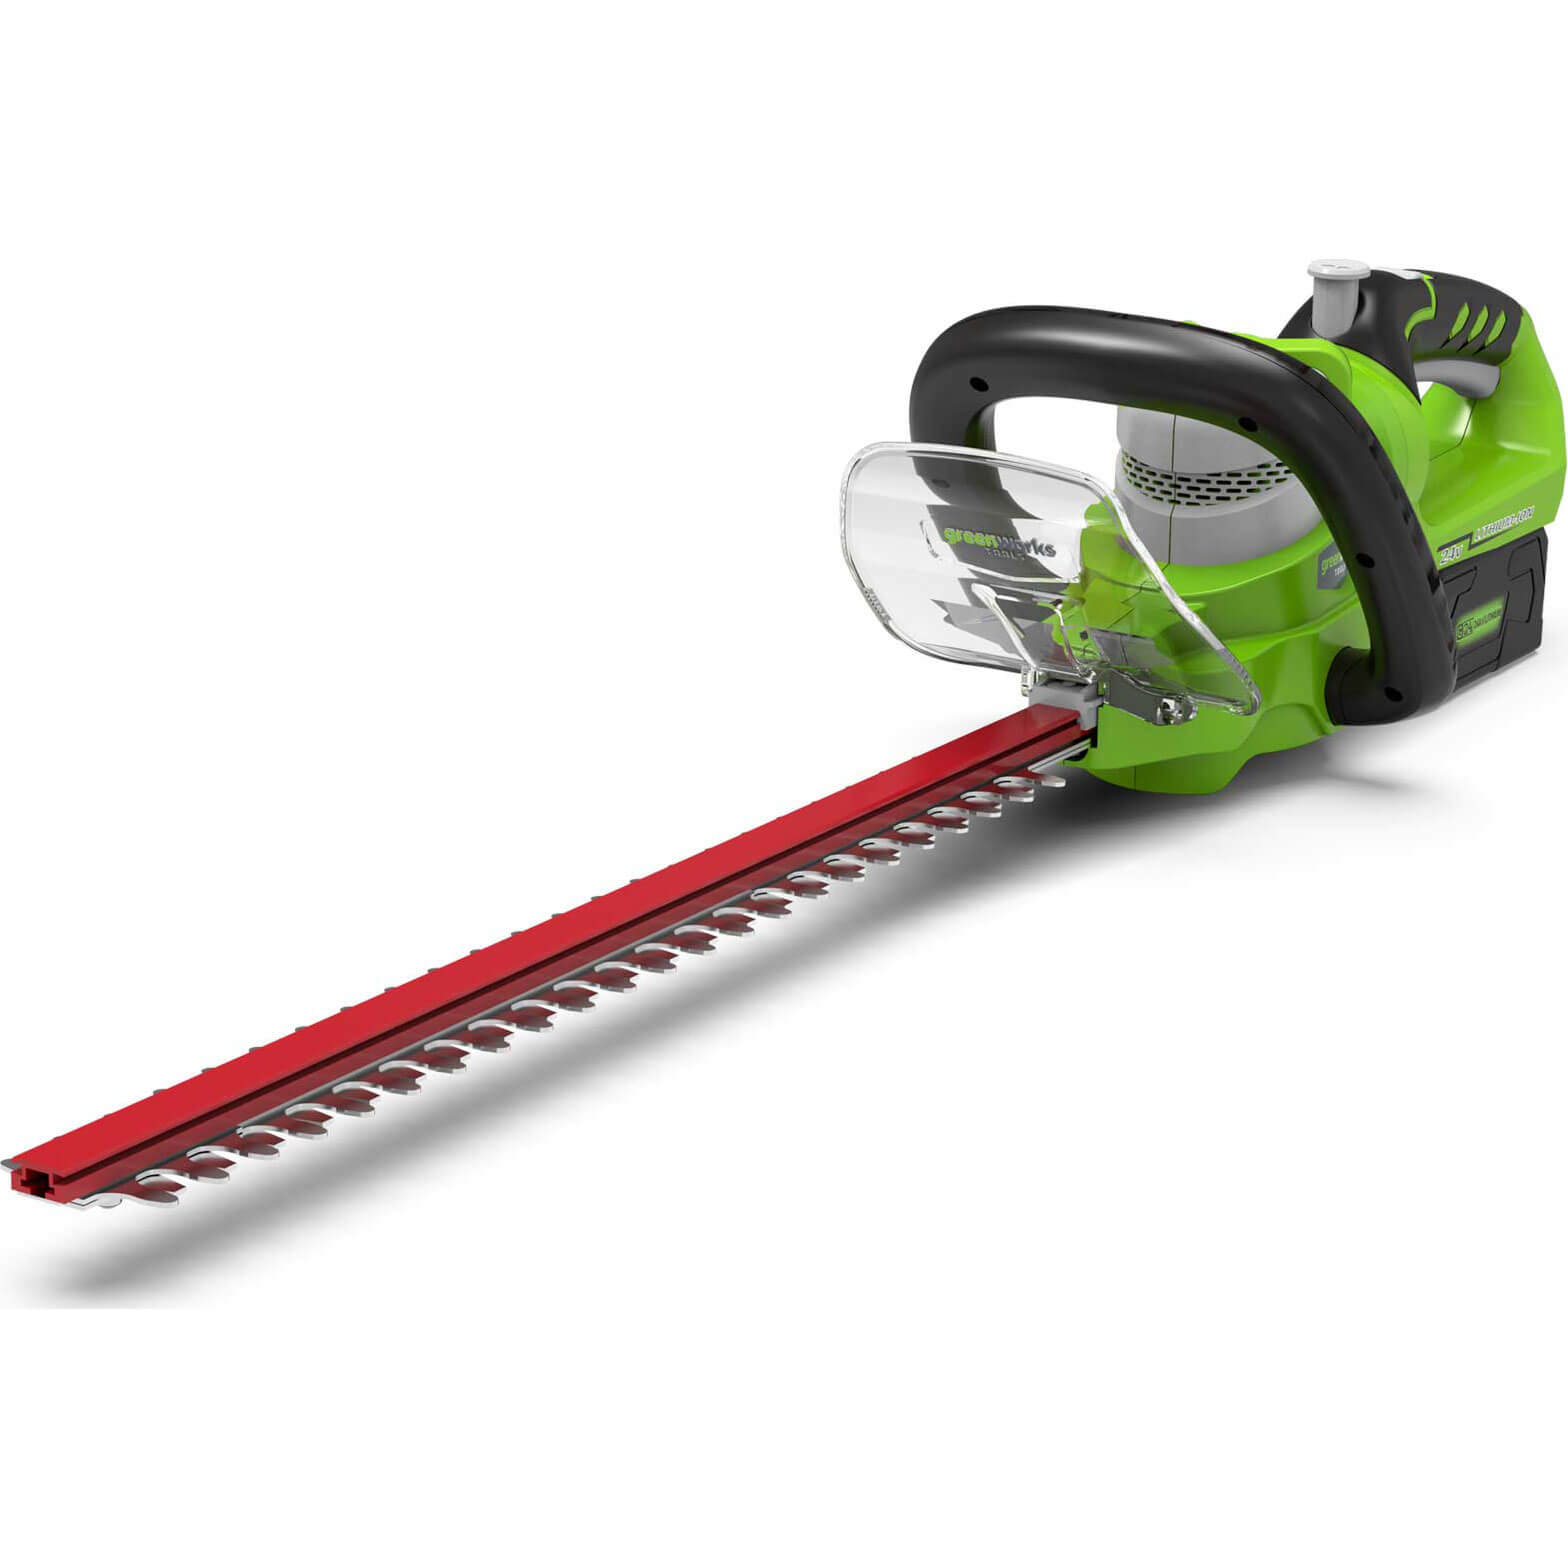 Greenworks G24HT57 24v Cordless Deluxe Hedge Trimmer 570mm 1 x 2ah Li-ion Charger